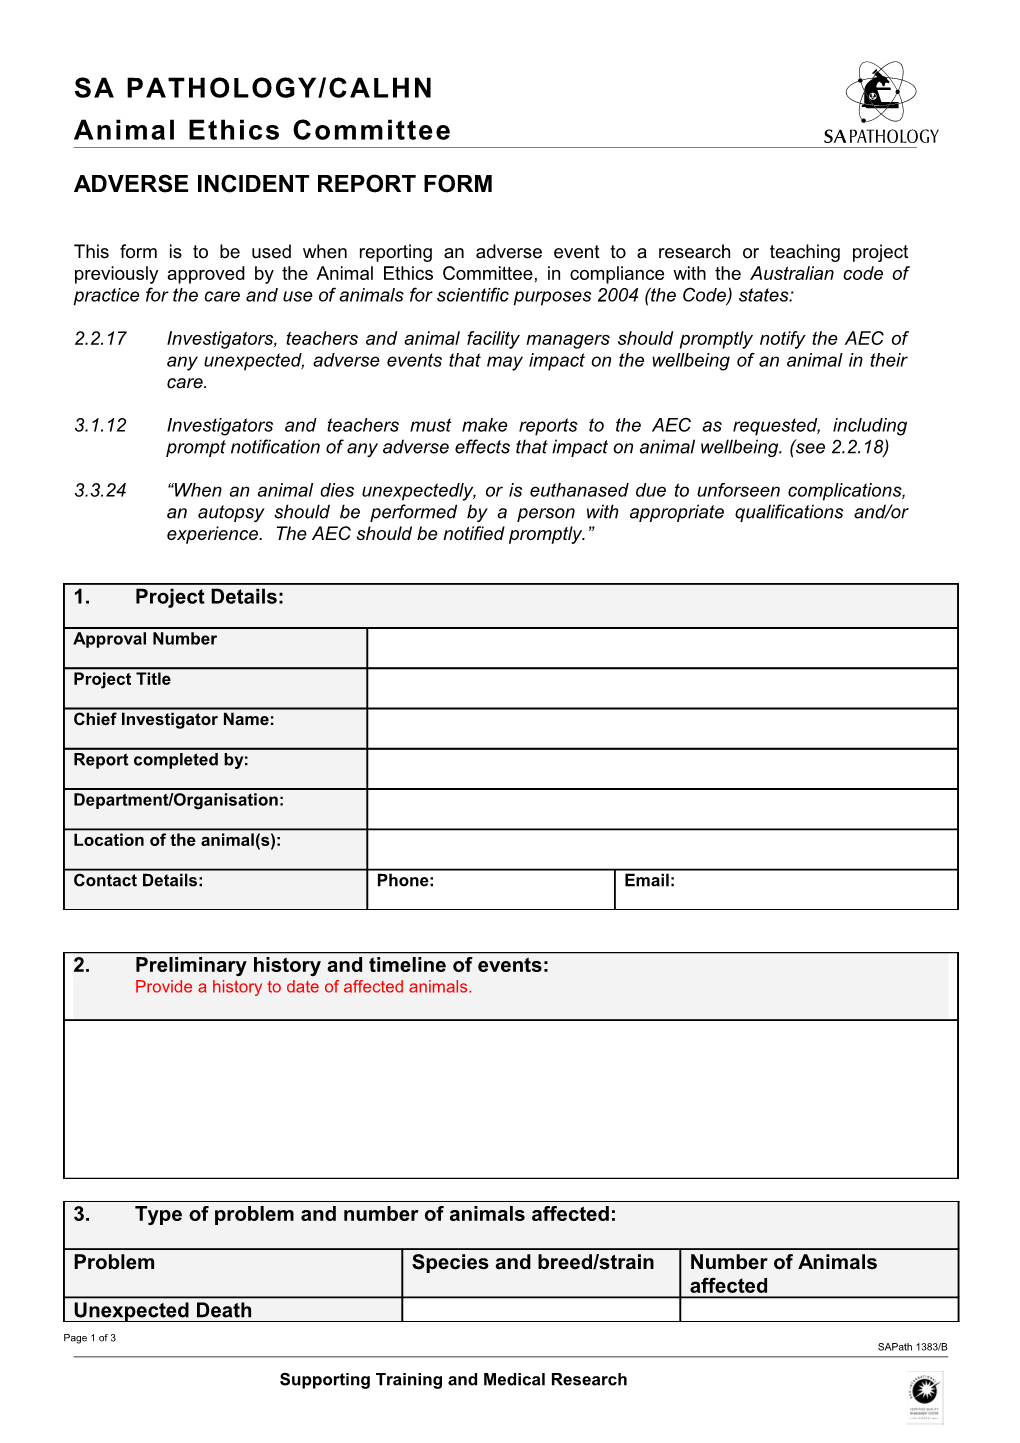 Adverse Incident Report Form